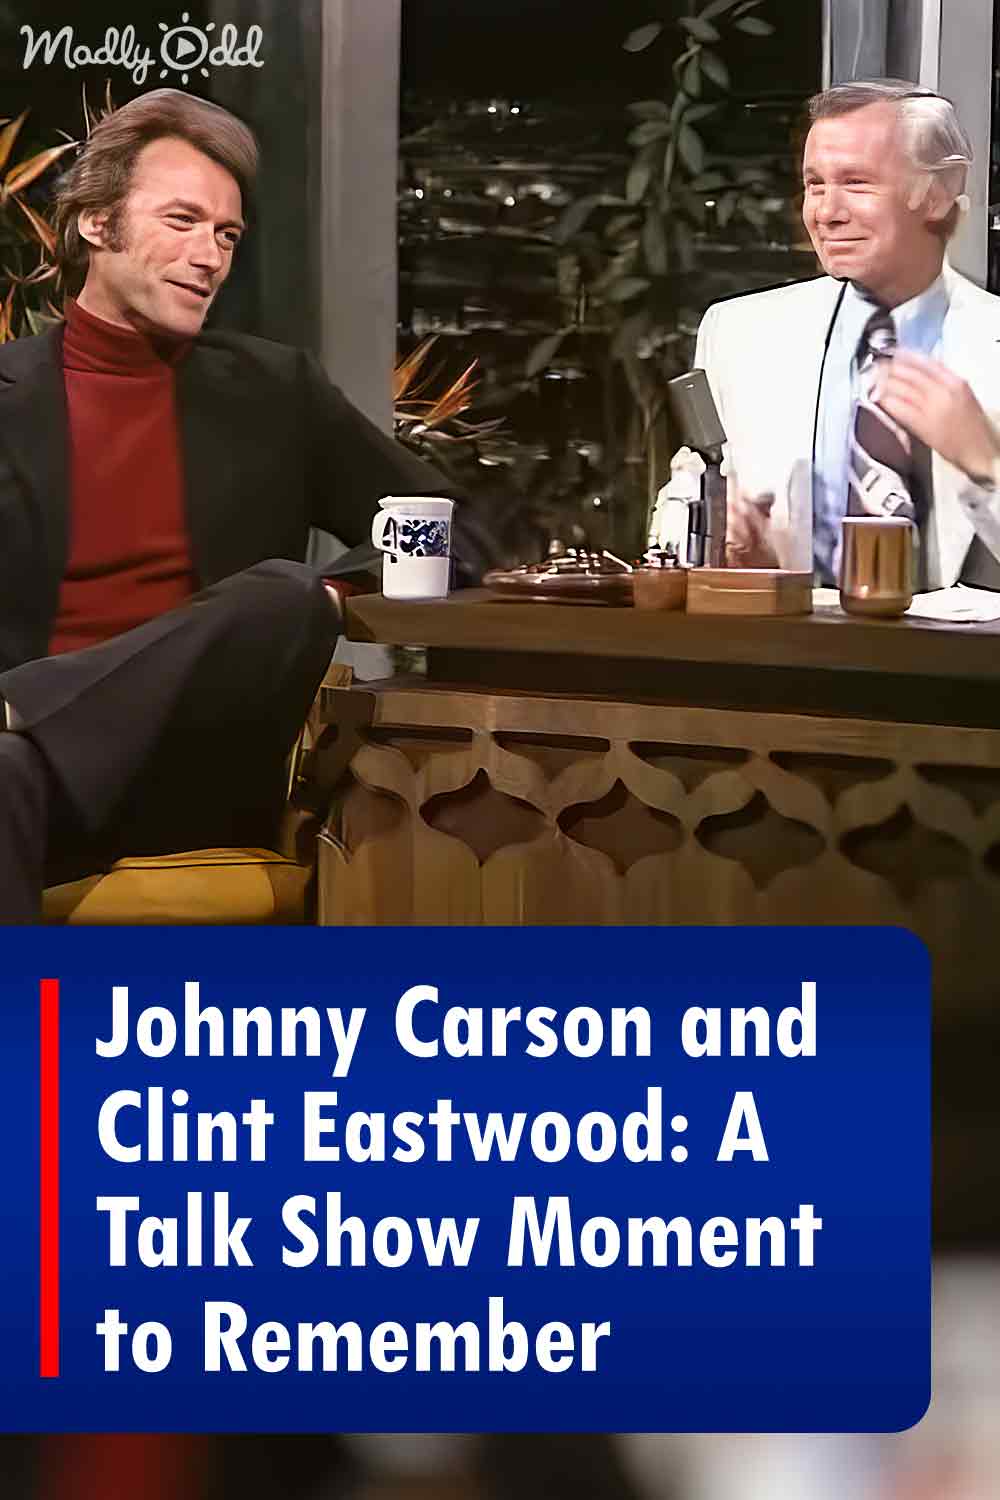 Johnny Carson and Clint Eastwood: A Talk Show Moment to Remember